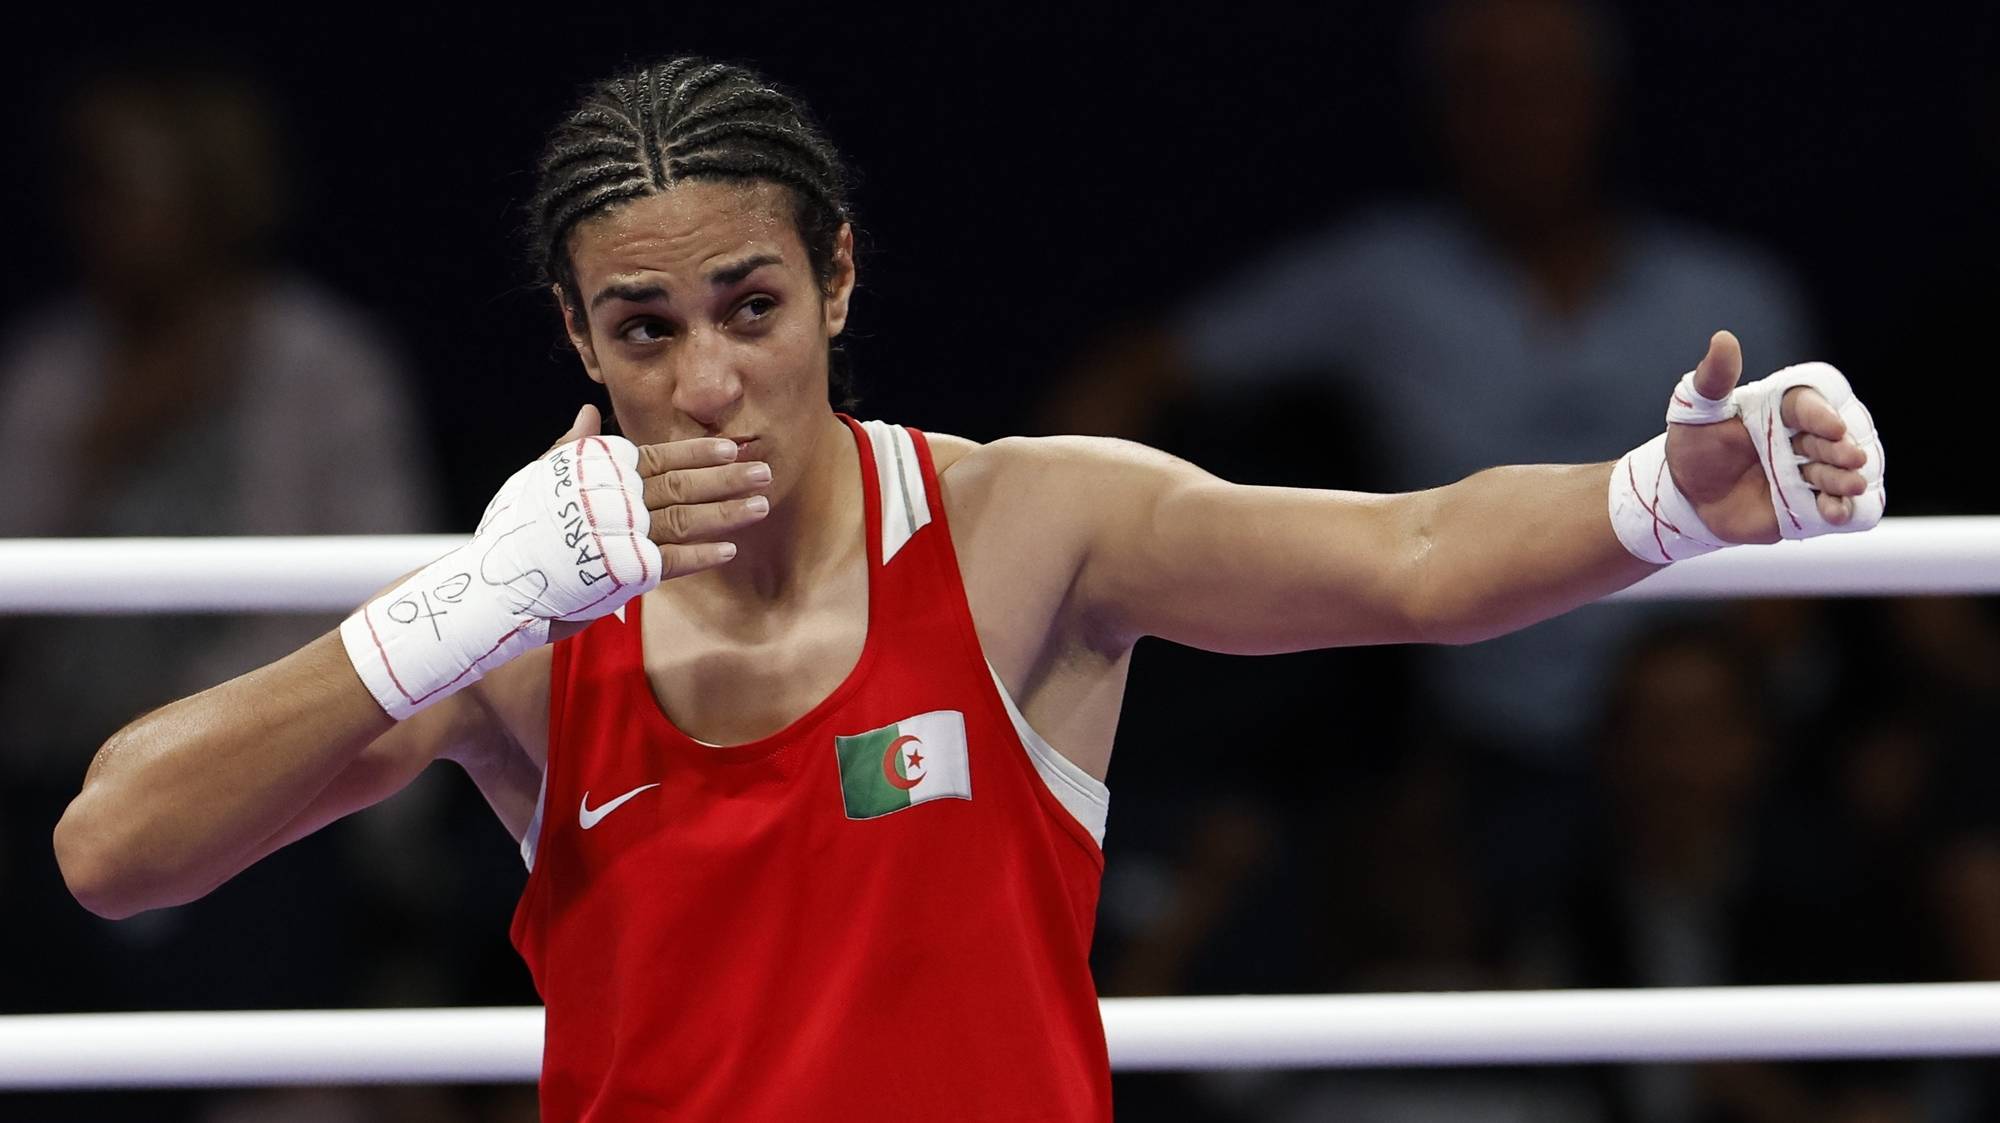 epa11522799 Imane Khelif of Algeria (red) celebrates winning over Anna Luca Hamori of Hungary (blue) in their Women 66kg Quarterfinal bout of the Boxing competitions in the Paris 2024 Olympic Games, at the North Paris Arena in Villepinte, France, 03 August 2024.  EPA/Miguel Tona